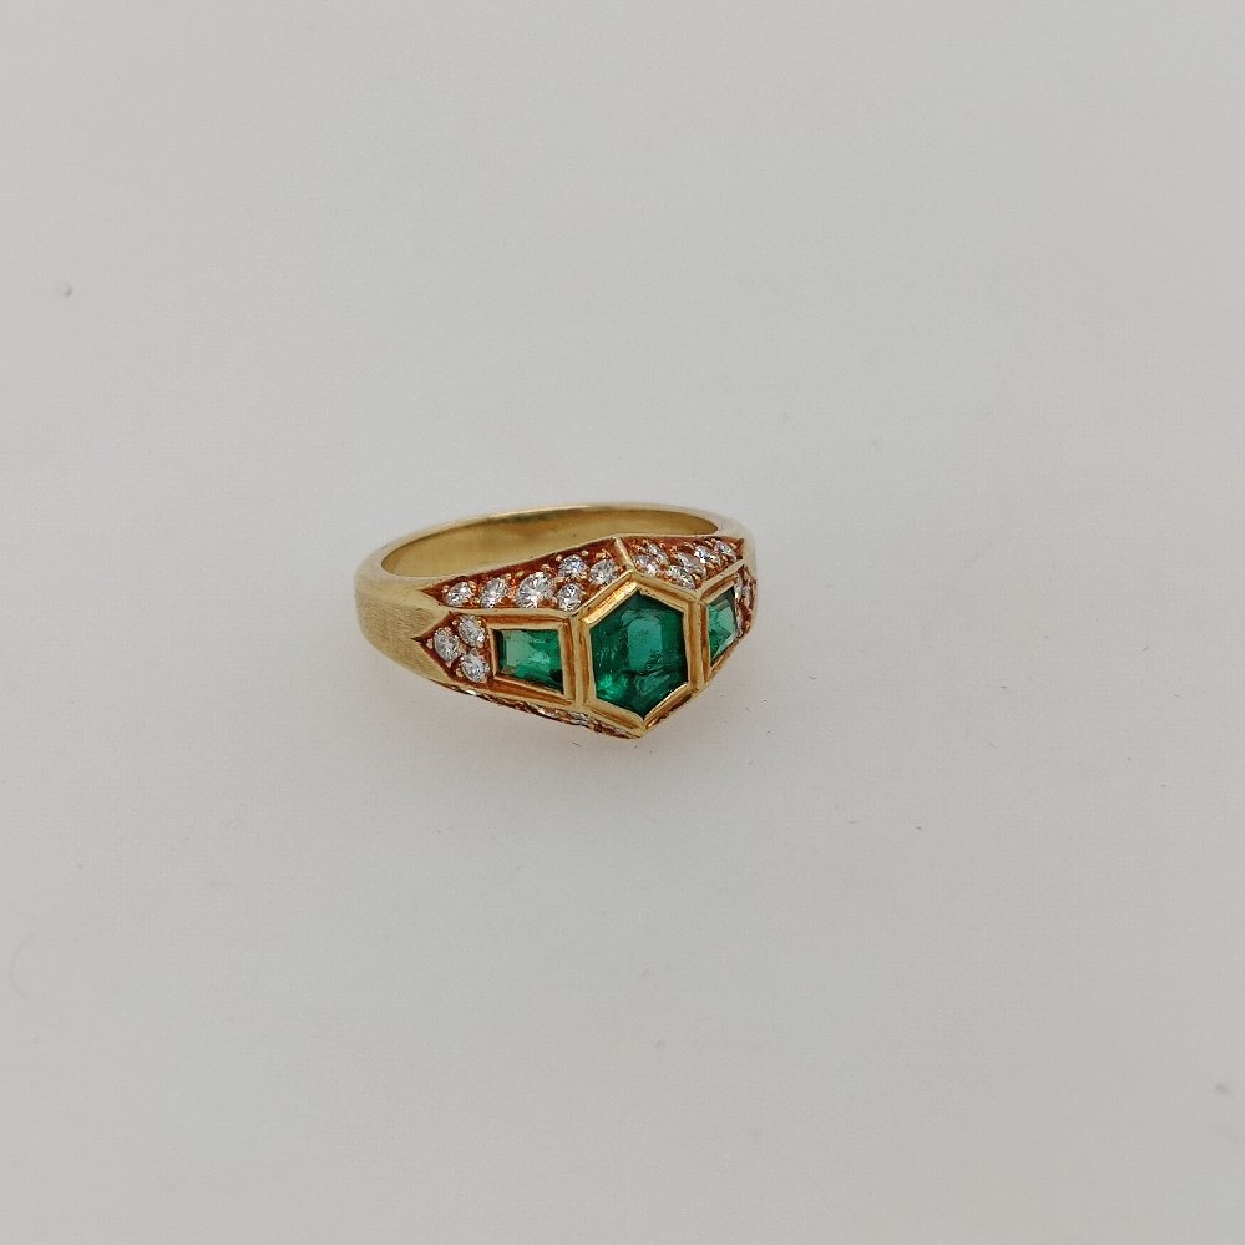 18K Yellow Gold Hexagonal Step Cut Emerald Ring with Trapezoid Emerald Accents and Pave Diamonds on the Shank; size 6.25